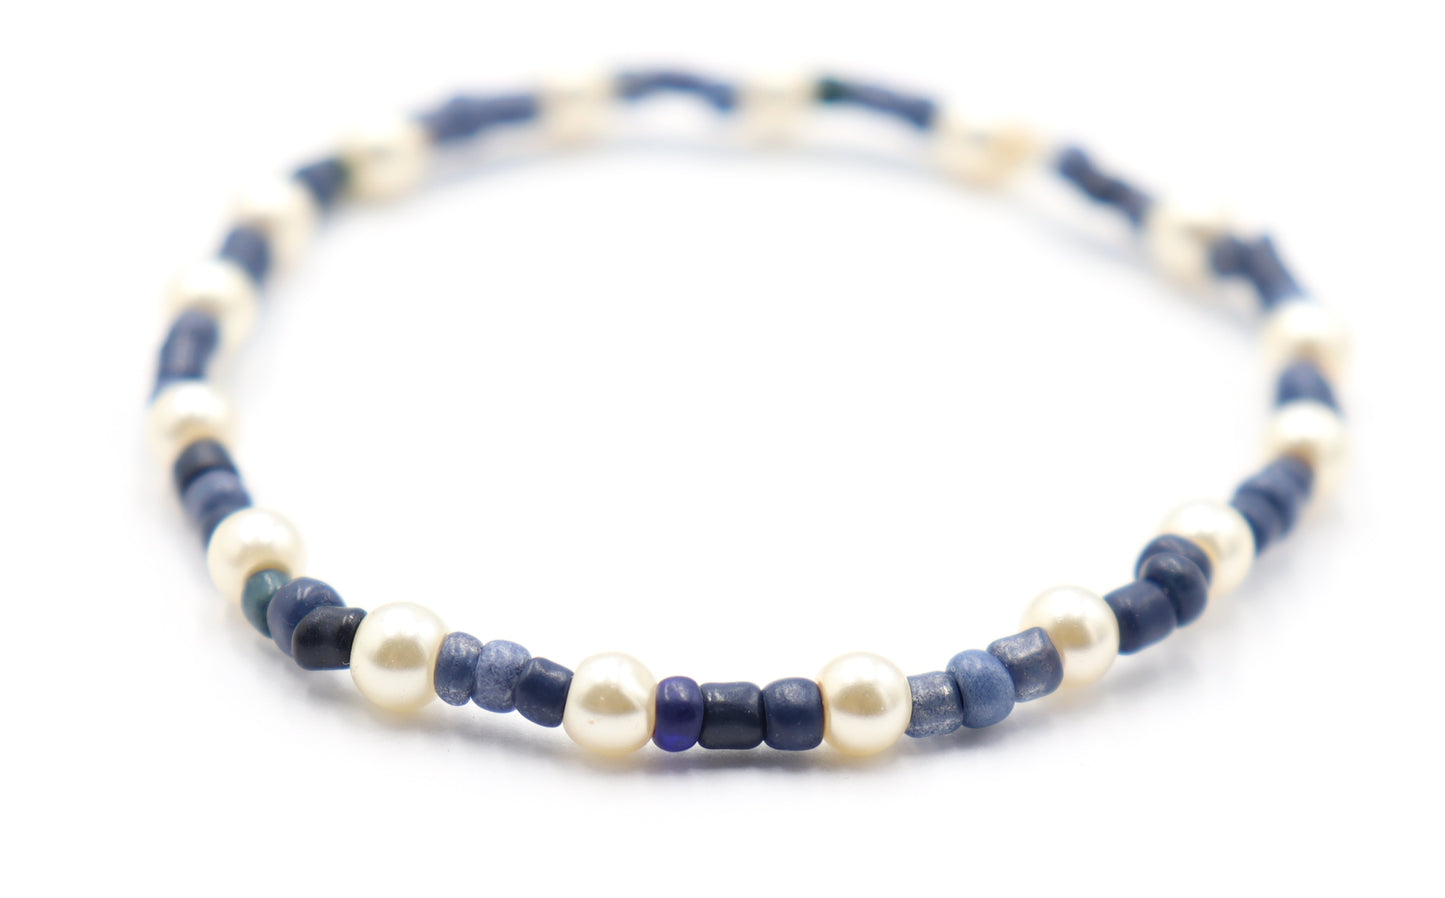 Classic and Classy Demin with Pearls - Blue and White Glass Bead Women's Stretch Bracelet by Monkey's Mojo